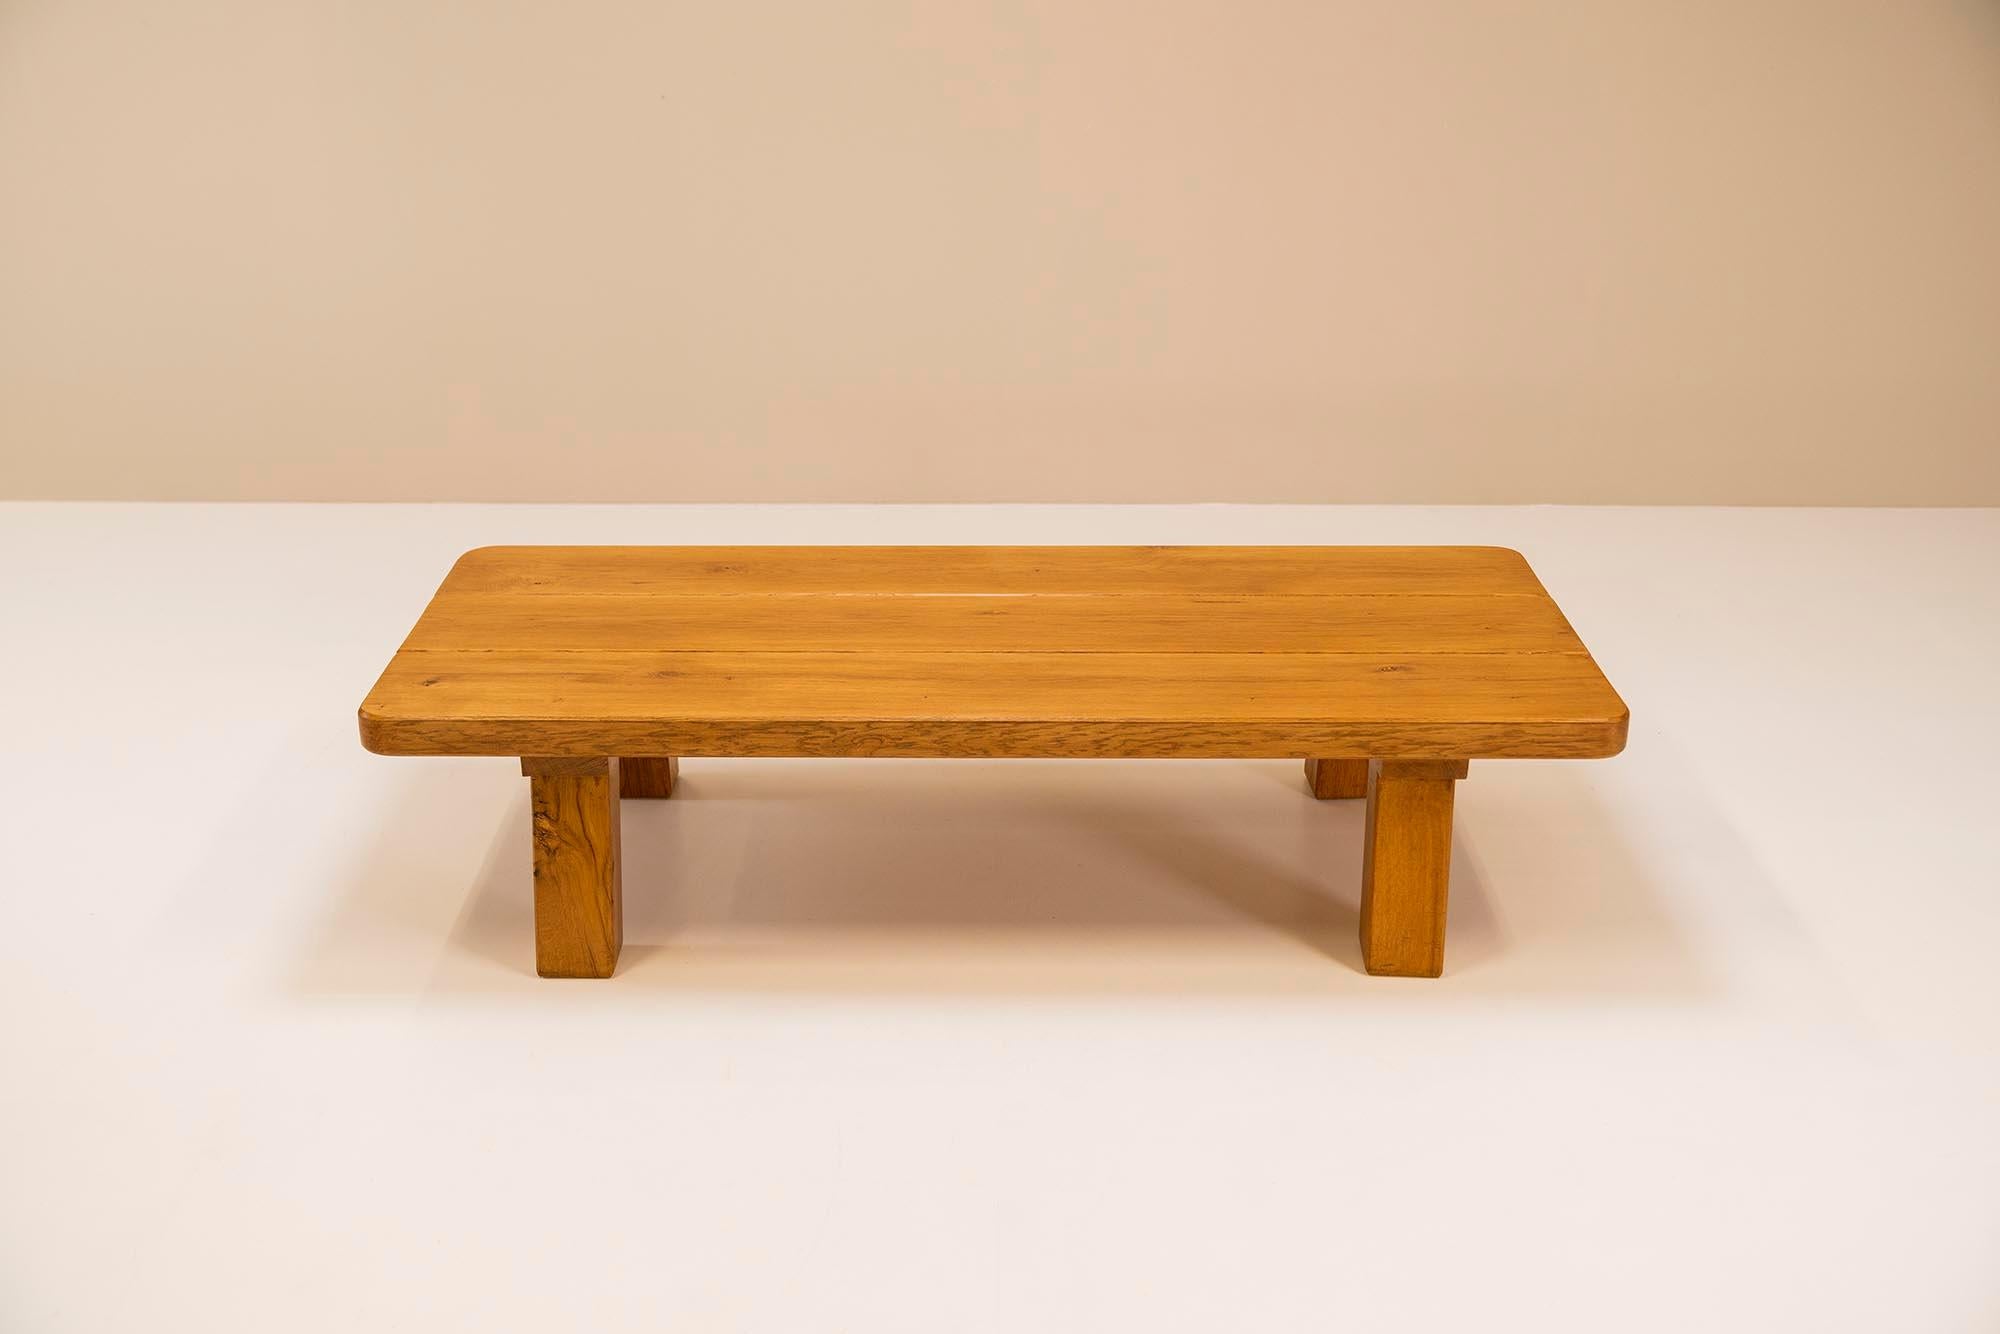 Robust, firm, and well-proportioned are the characteristics of this beautiful French coffee table in the style of brutalism from the 1960s. The blond oak has acquired a wonderful patina over the years. The top consists of three coarse parts that are